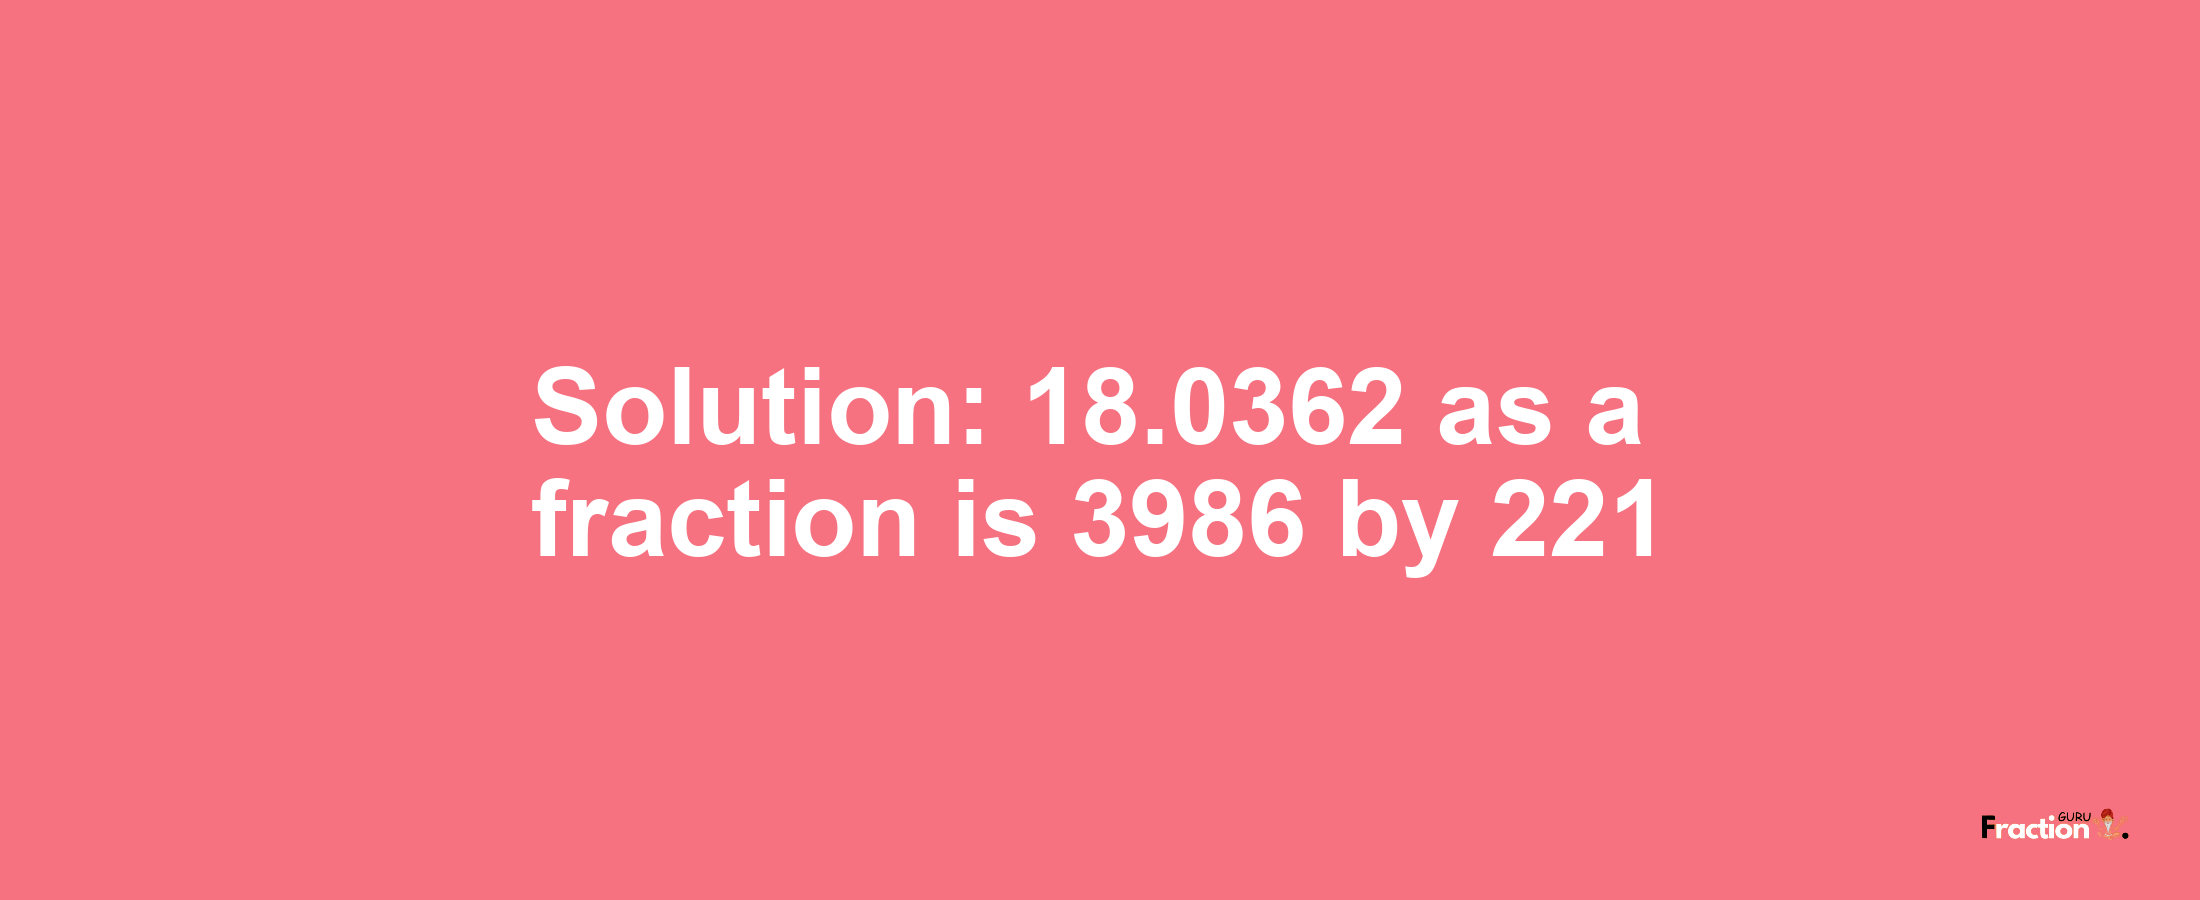 Solution:18.0362 as a fraction is 3986/221